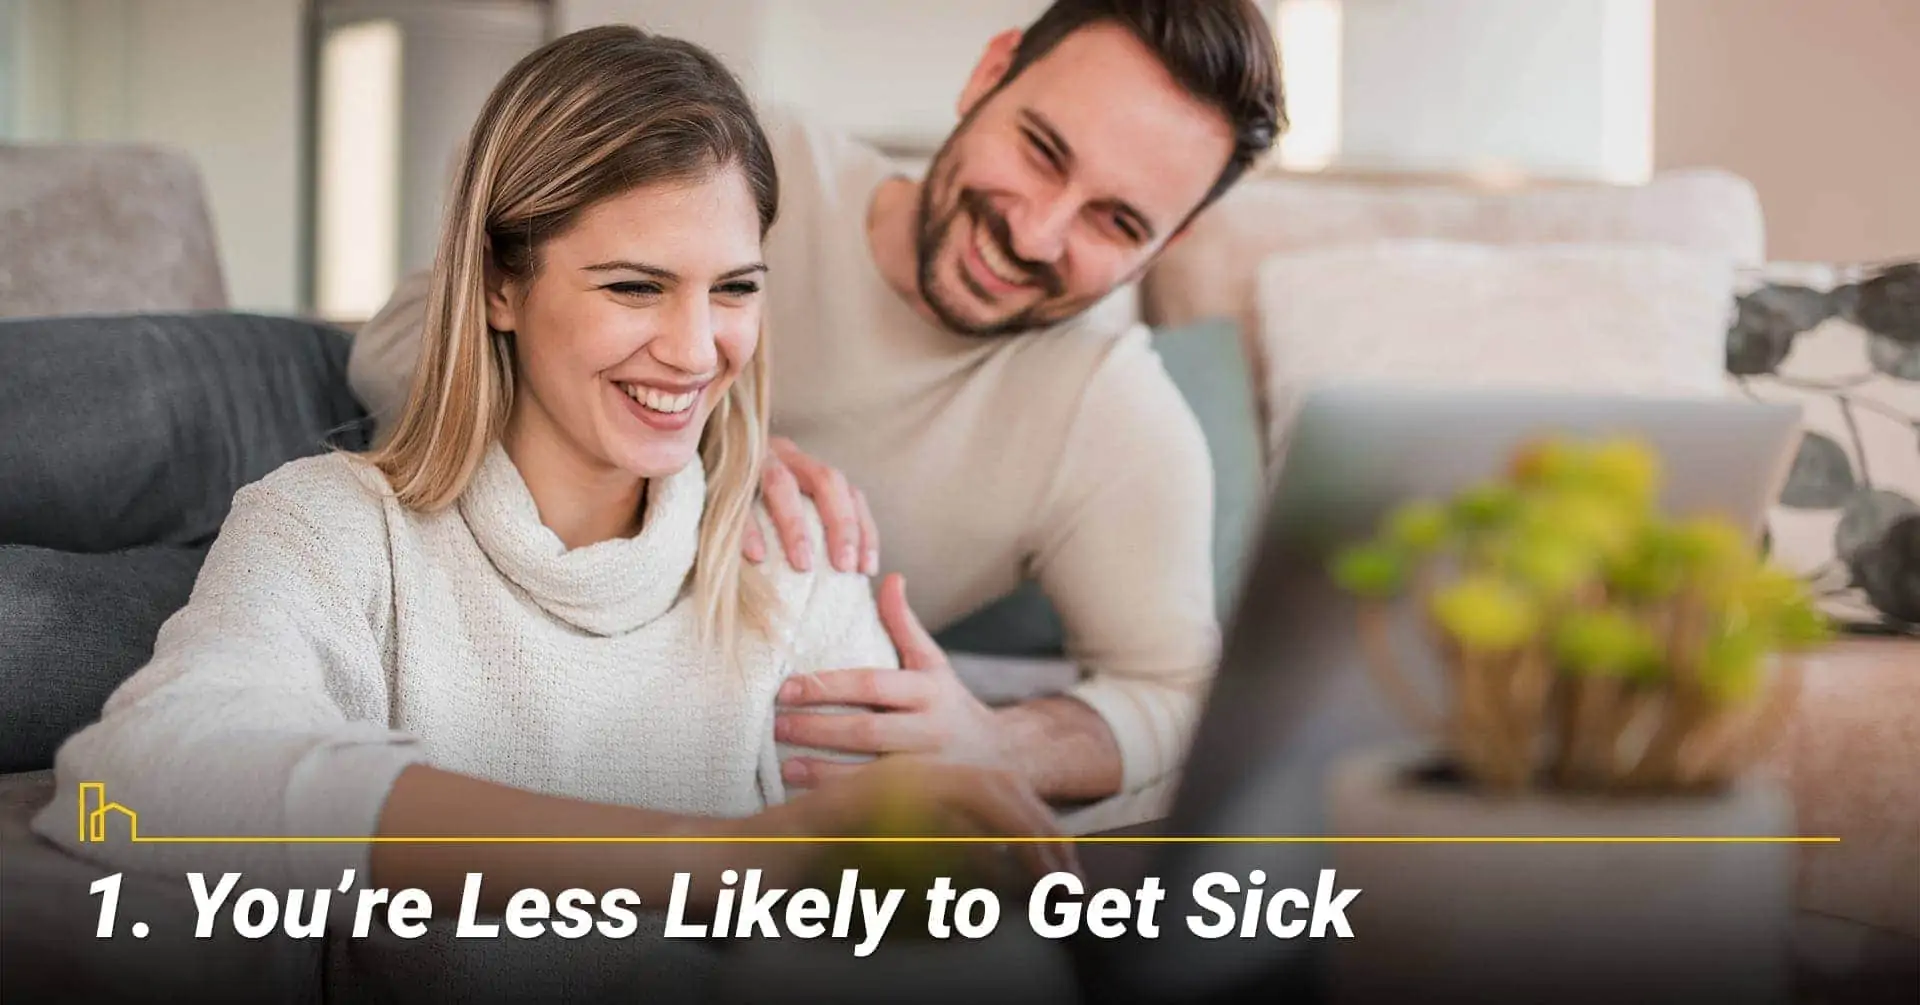 You’re Less Likely to Get Sick, avoid getting sick